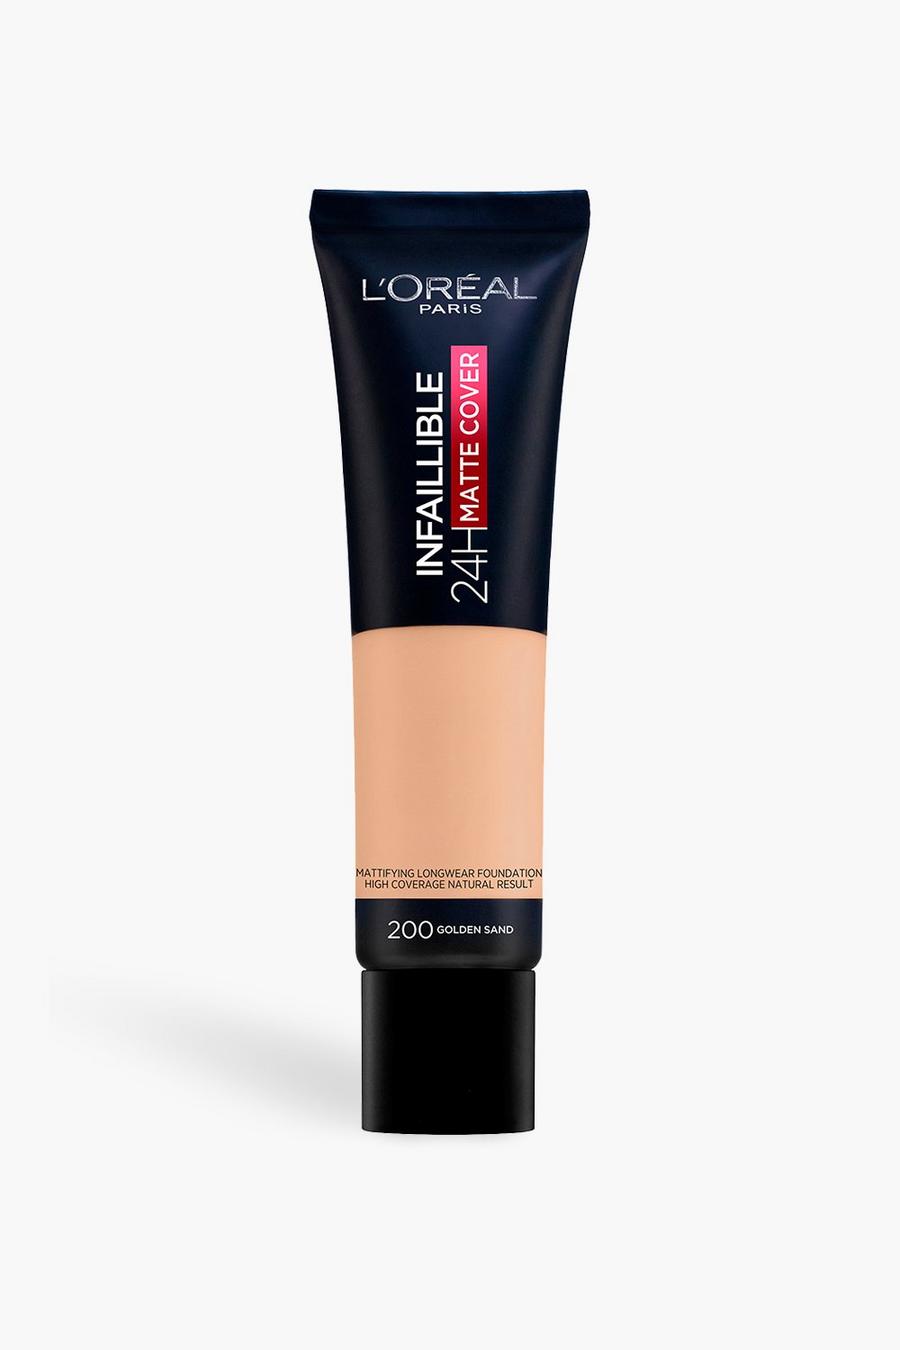  L'Oreal Paris Infallible 24H Foundation, 200 Golden Sand, 30  ml : Beauty & Personal Care